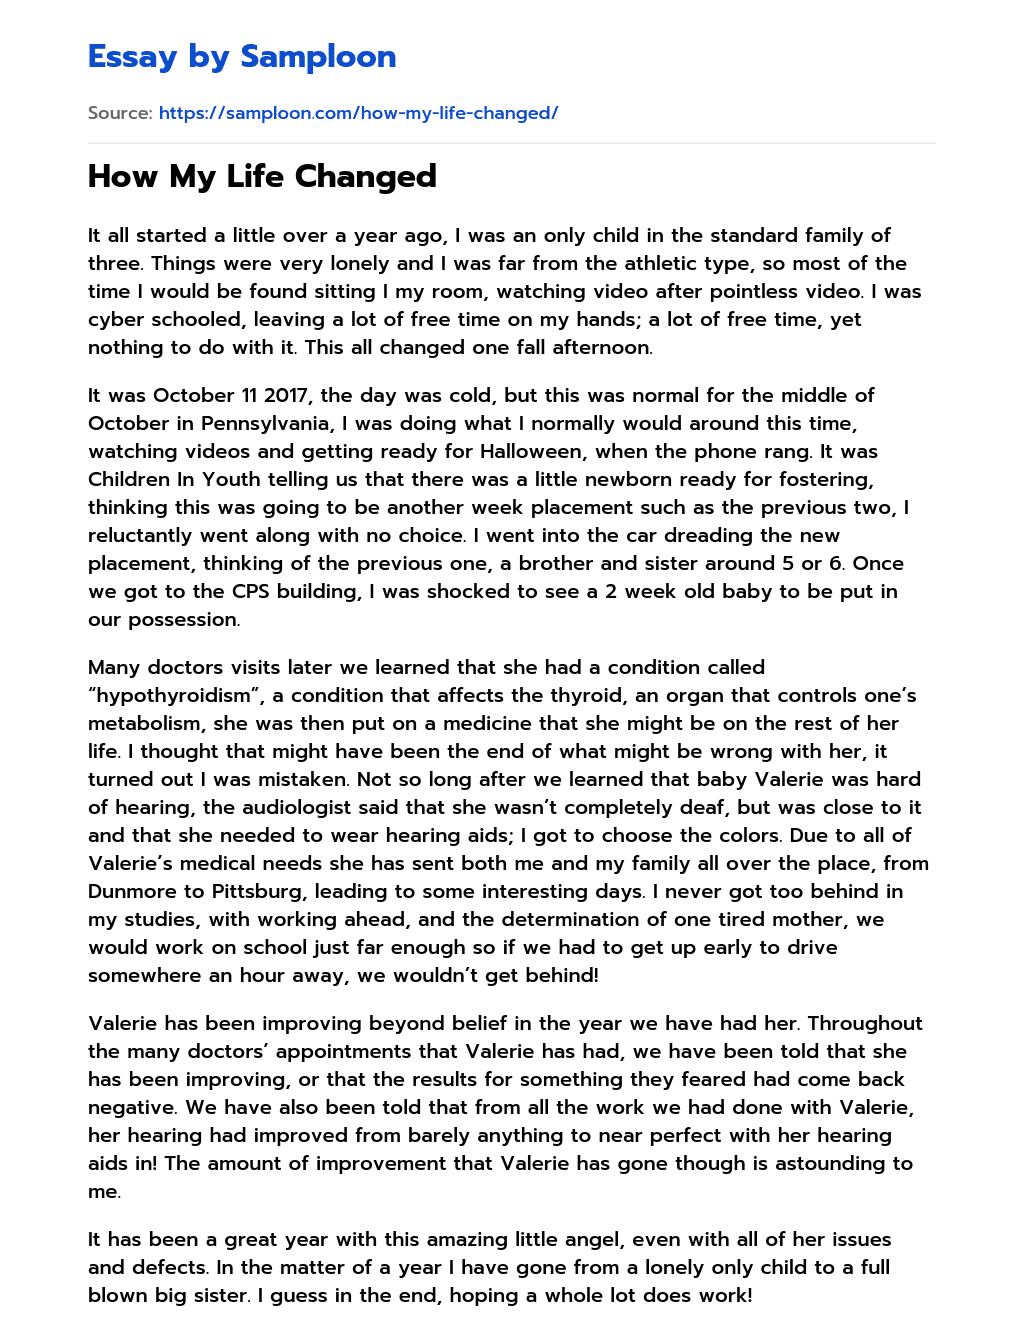 How My Life Changed Free Essay Sample On Samploon Com